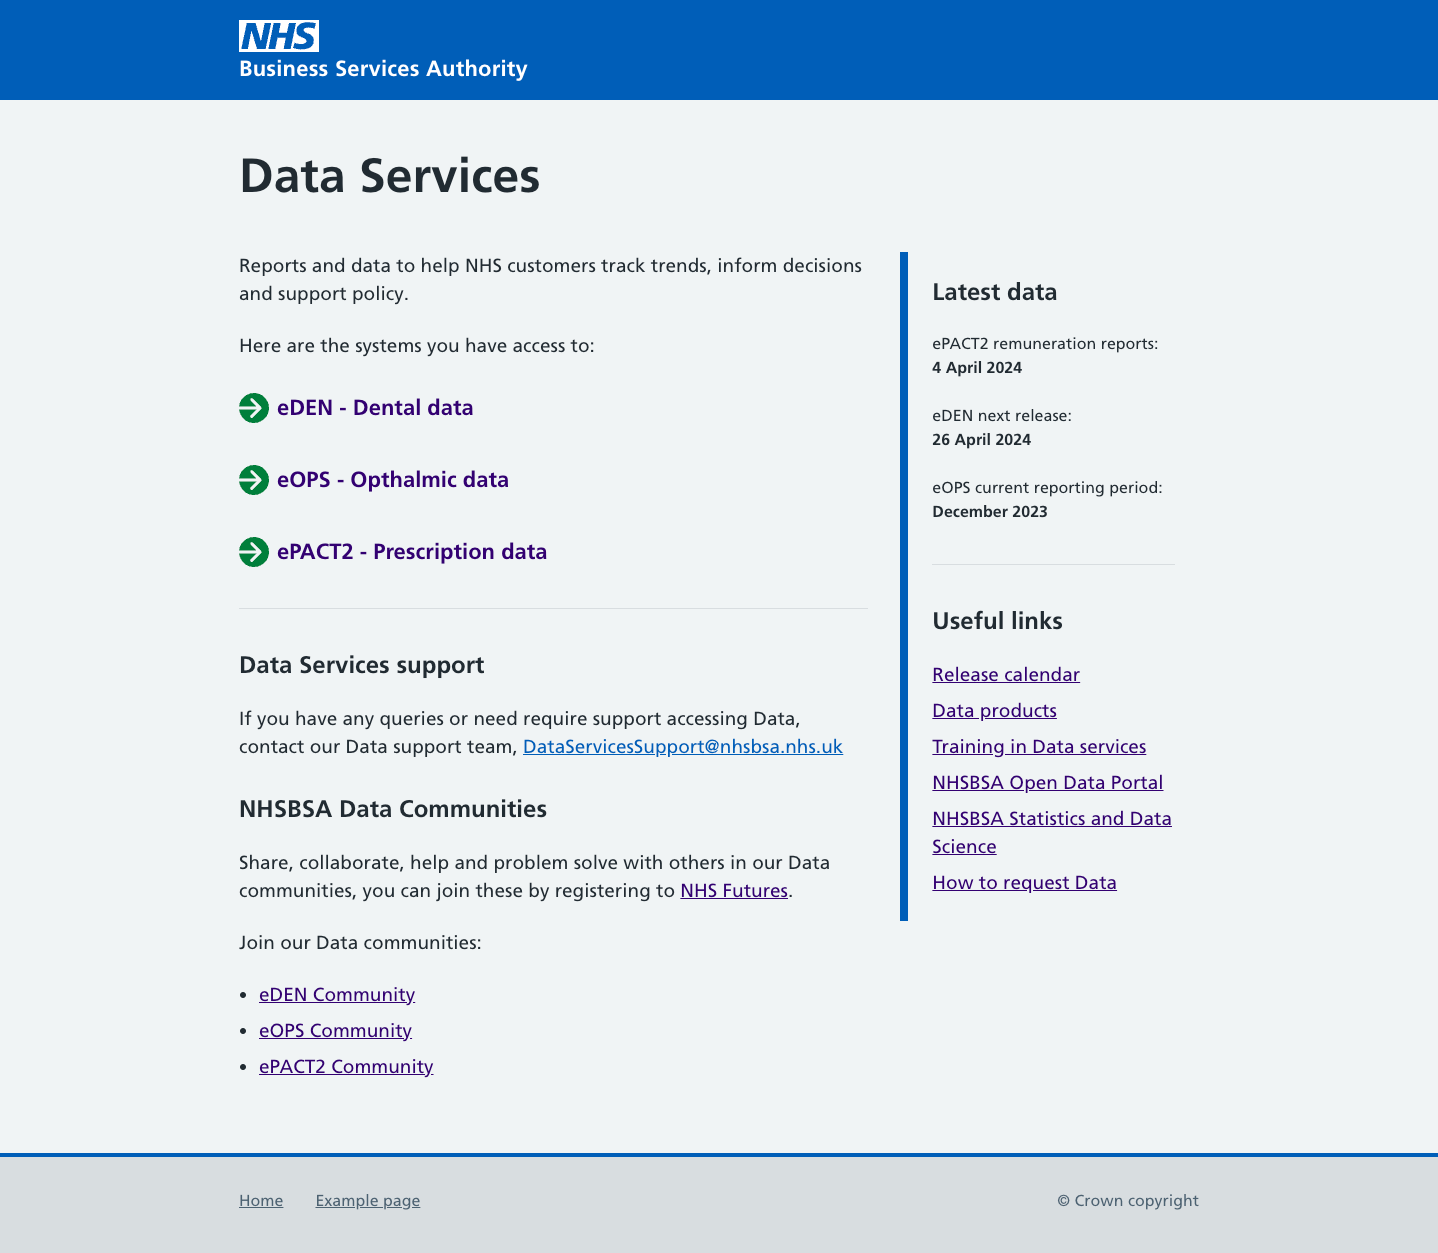 Image showing the future version of the data services portal with new NHS branding